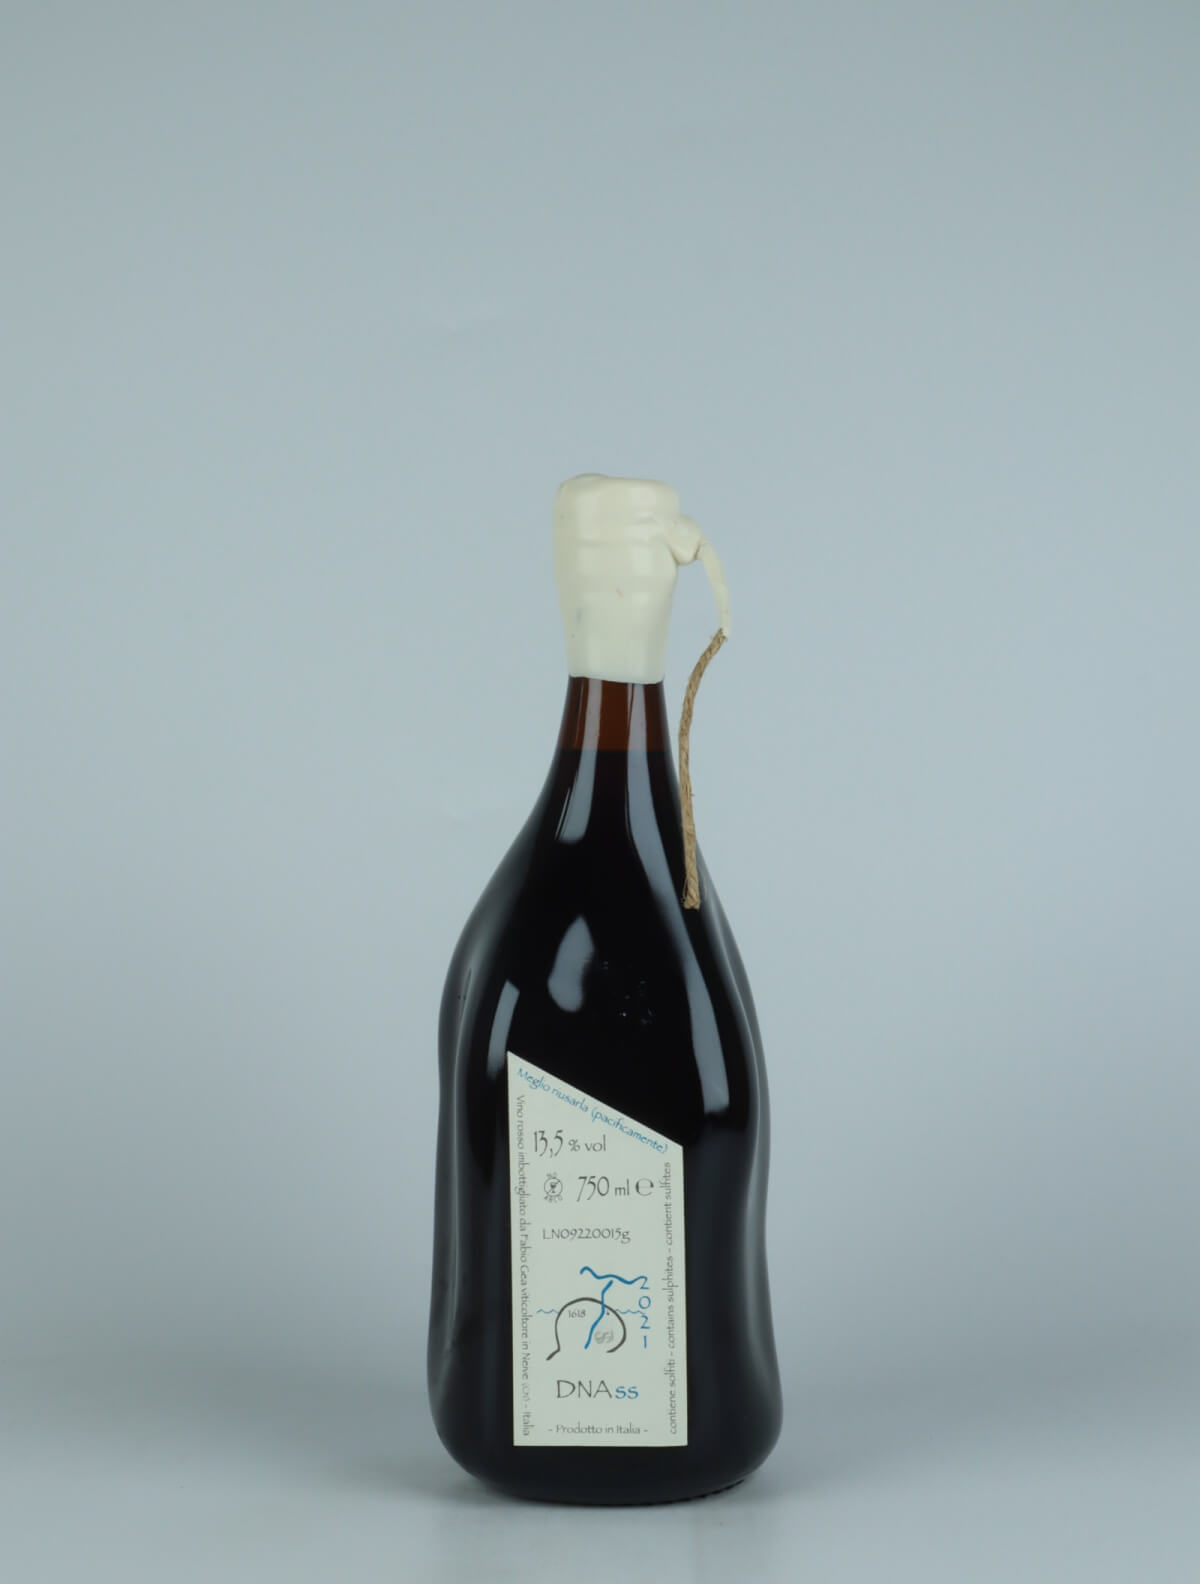 A bottle 2021 DNAss Red wine from Fabio Gea, Piedmont in Italy